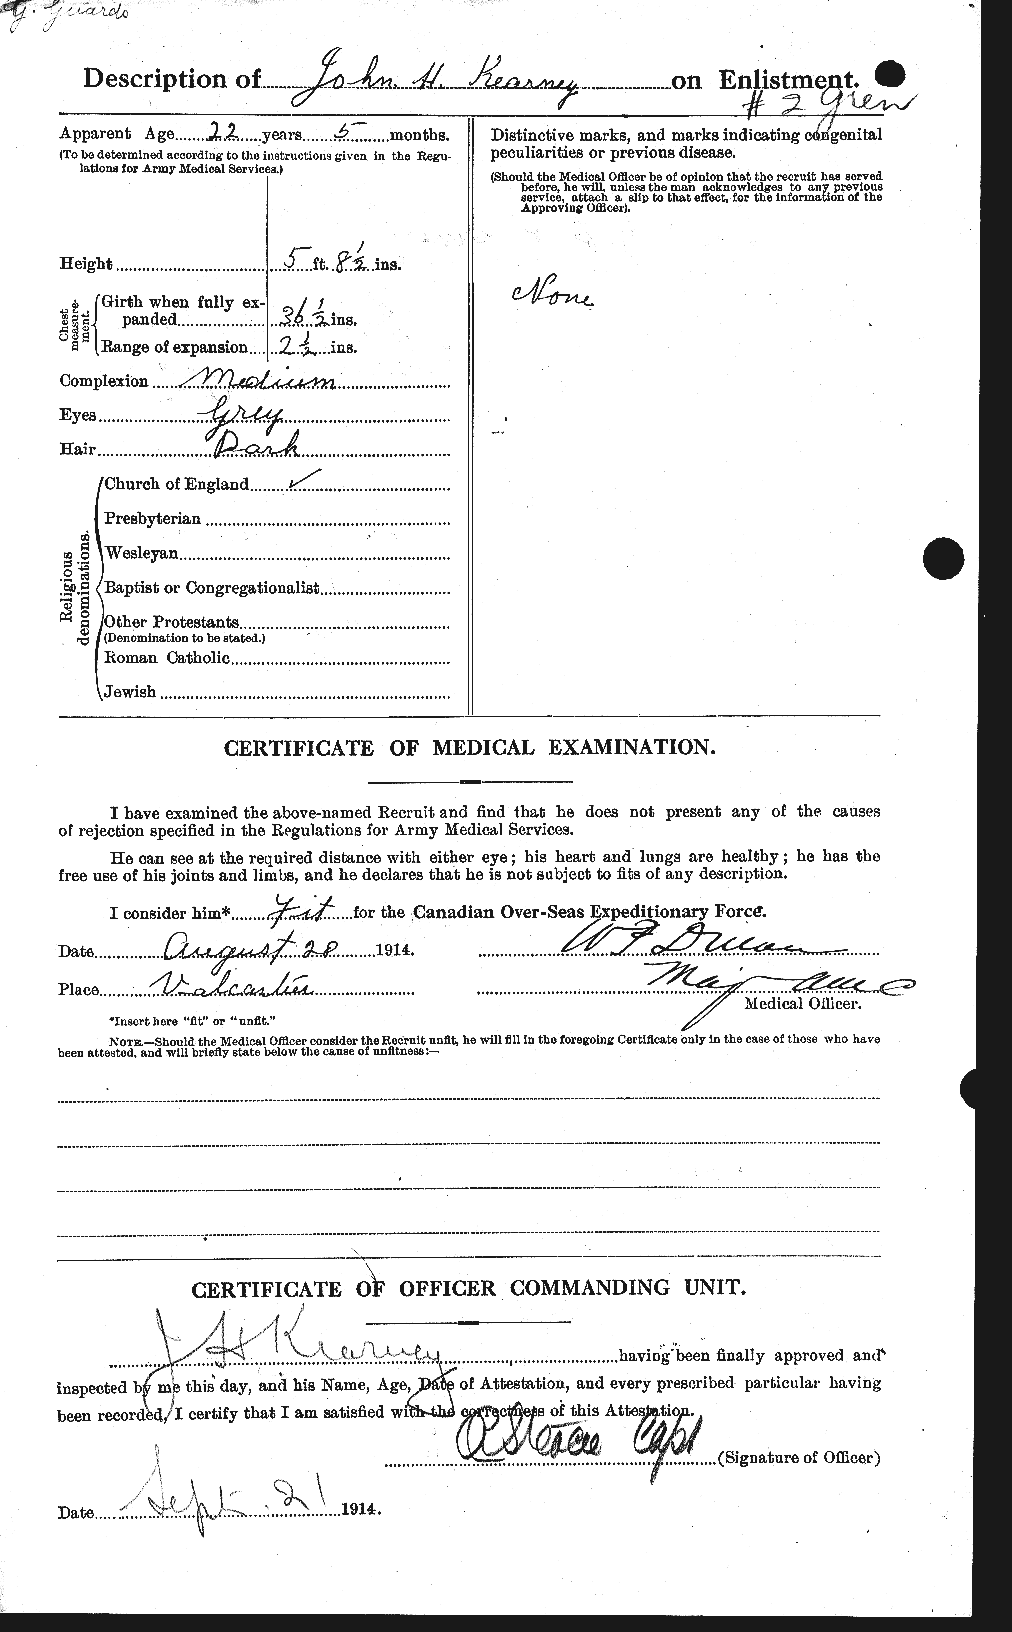 Personnel Records of the First World War - CEF 428043b